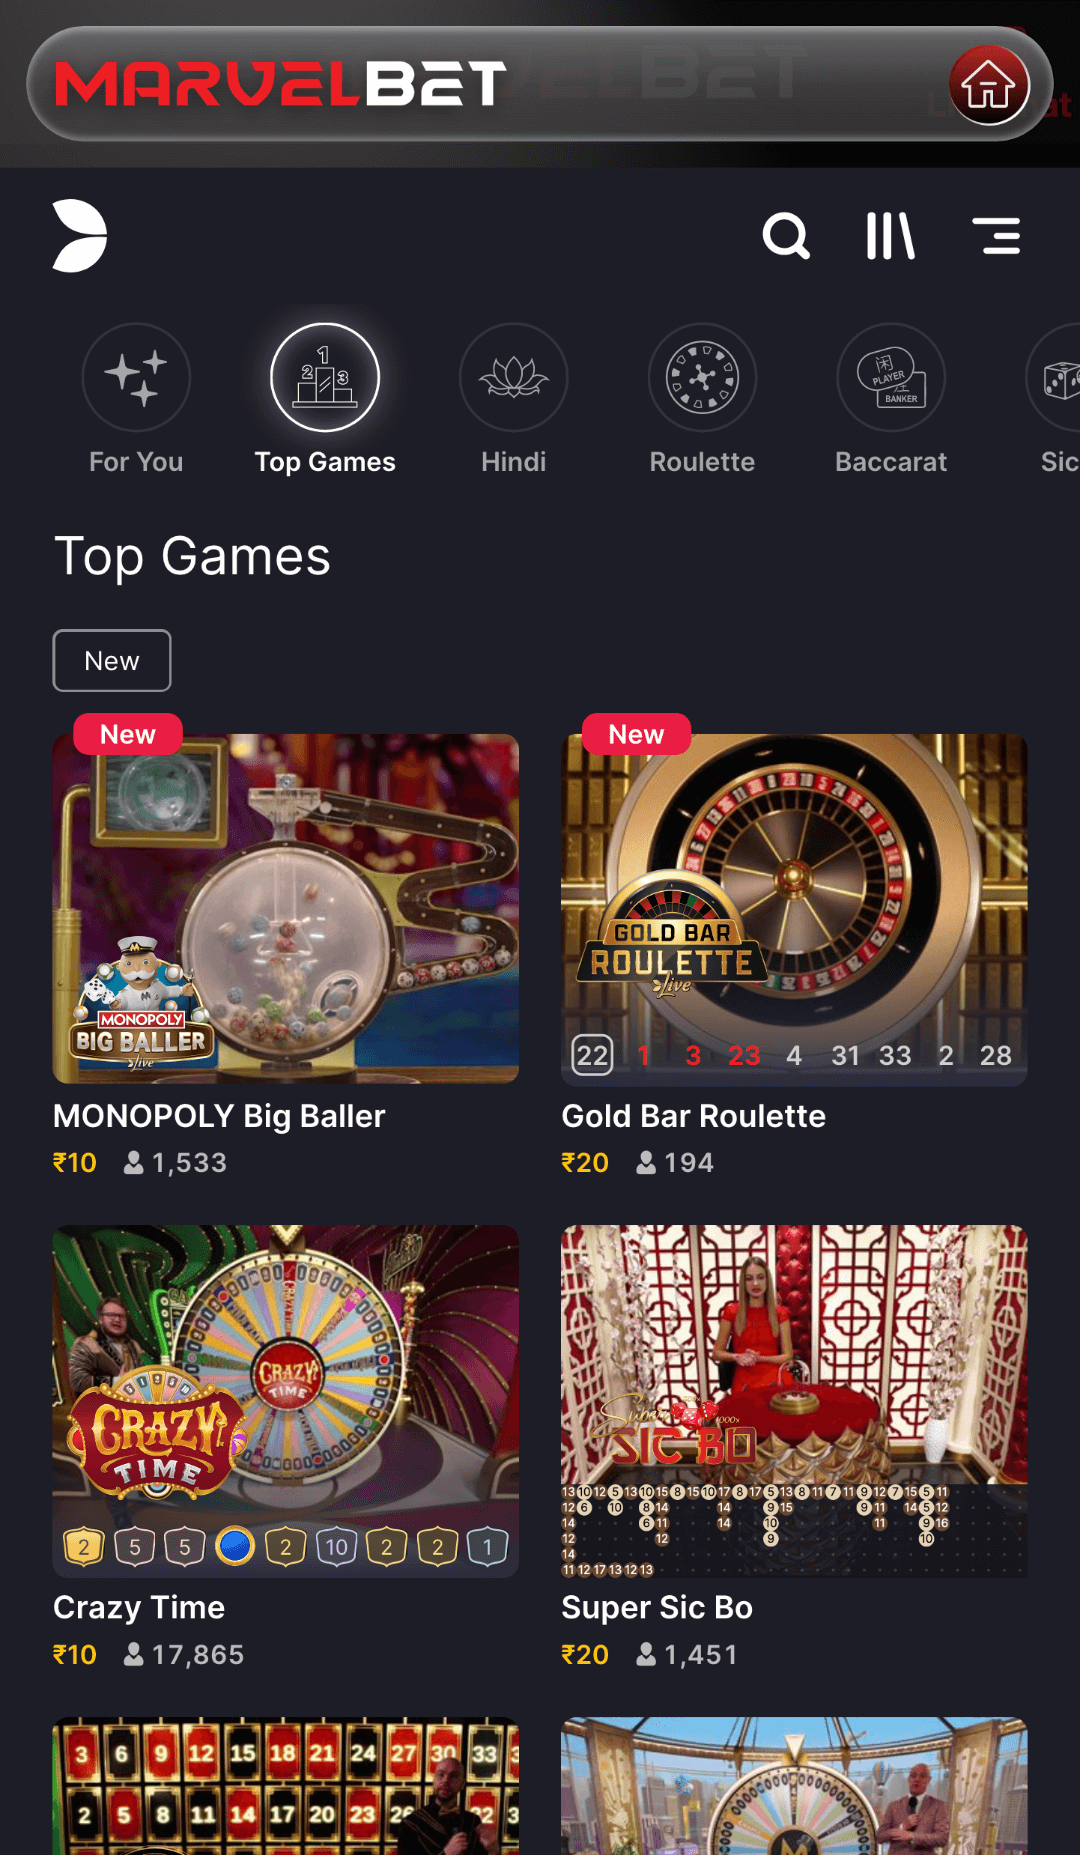 Live casino section in the Marvelbet app